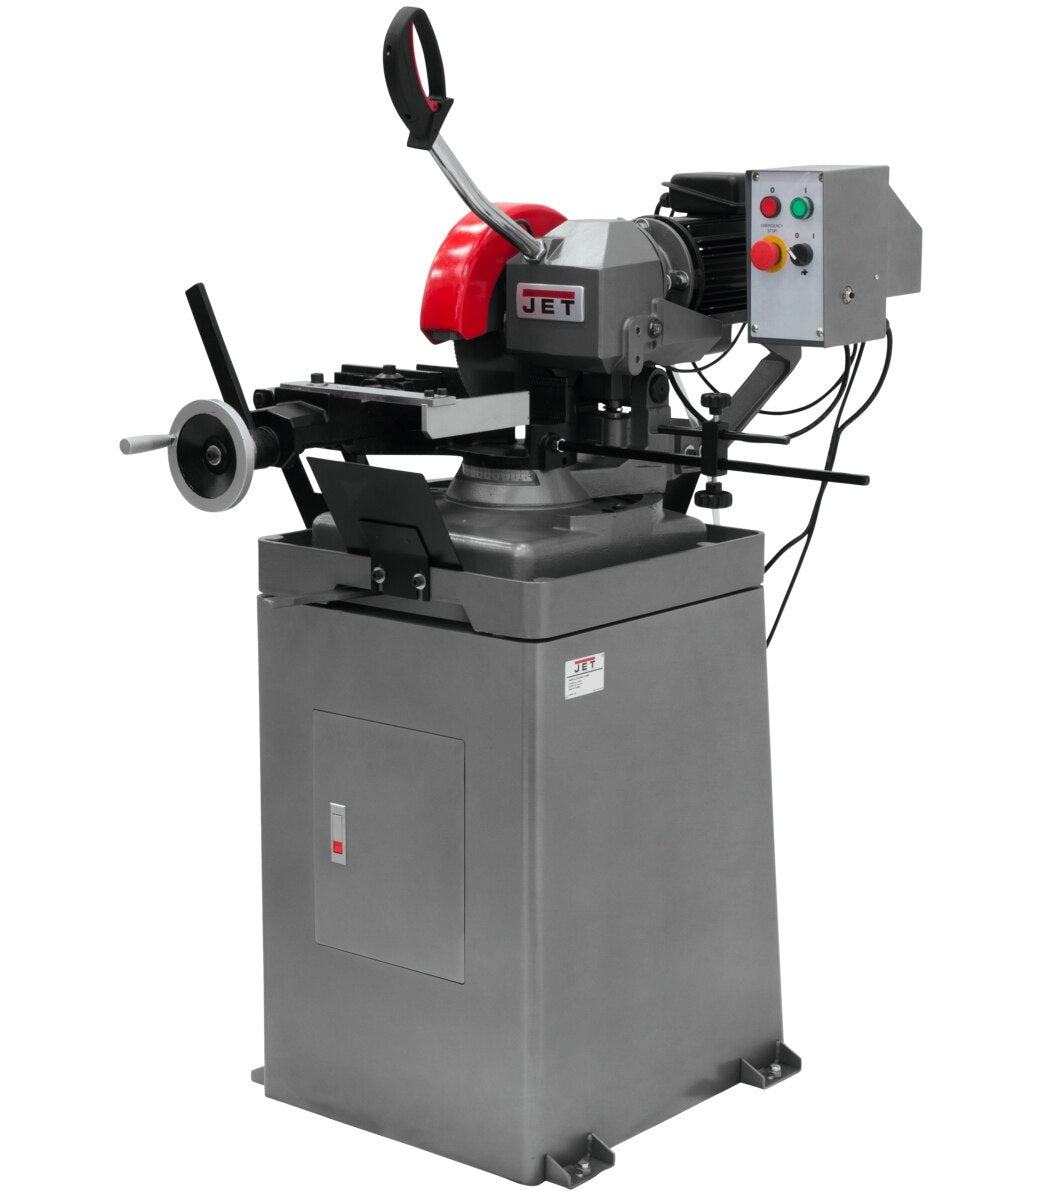 CS-275, 275mm 1-Phase Ferrous Manual Cold Saw